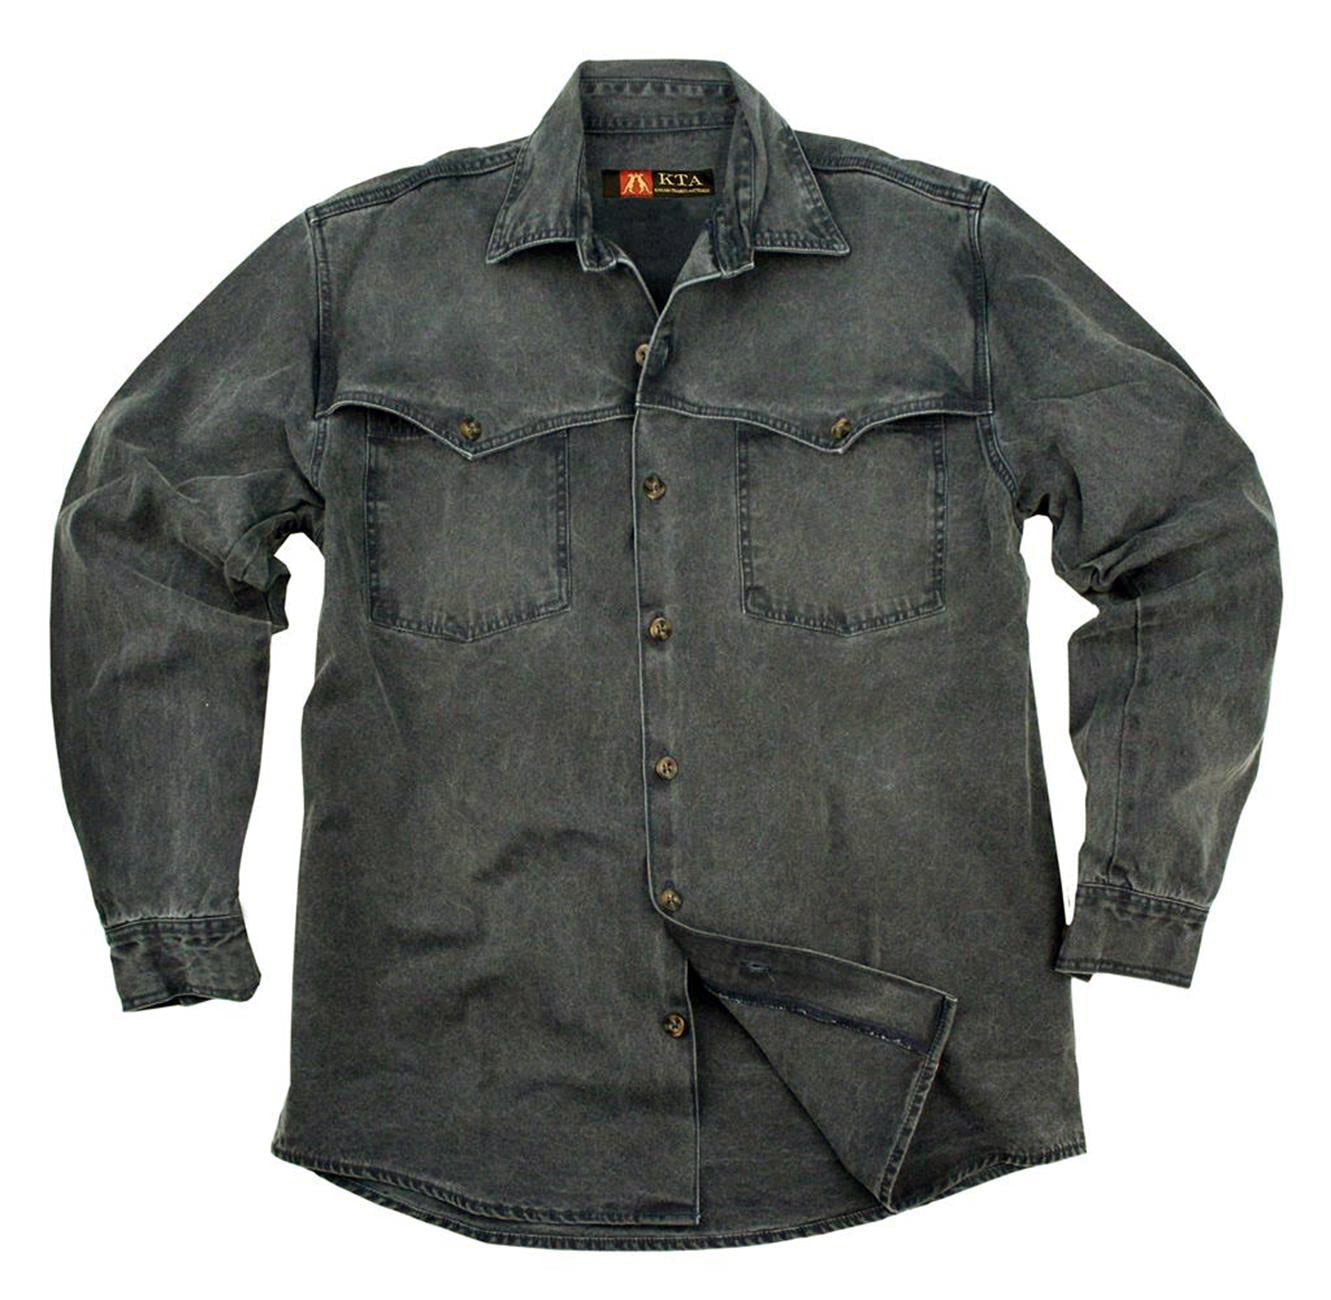 Robust Cowyboy men's shirt with a classic western edge above the chest